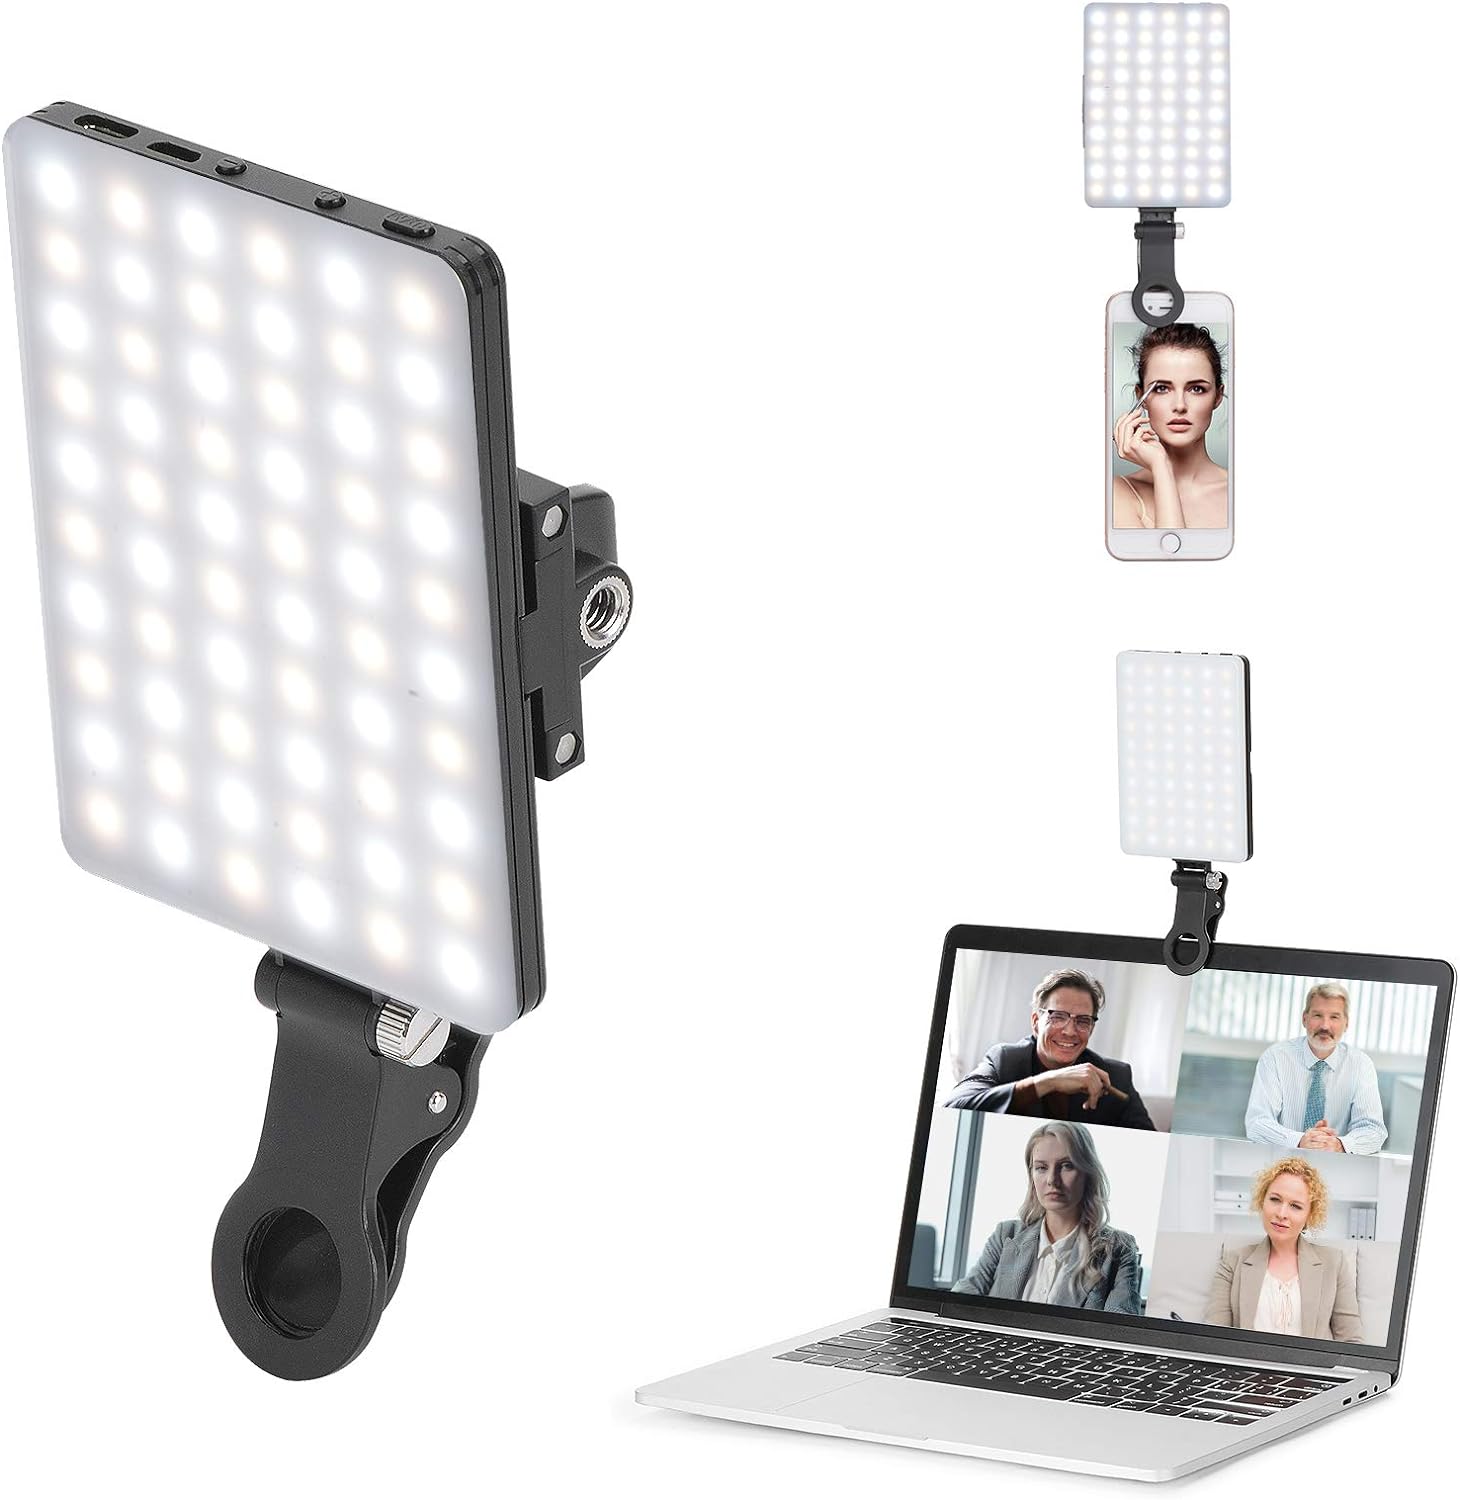 Newmowa 60 LED High Power Rechargeable Clip Fill Video Conference Light with Front  Back Clip, Adjusted 3 Light Modes for Phone, iPhone, Android, iPad, Laptop, for Makeup, TikTok, Selfie, Vlog